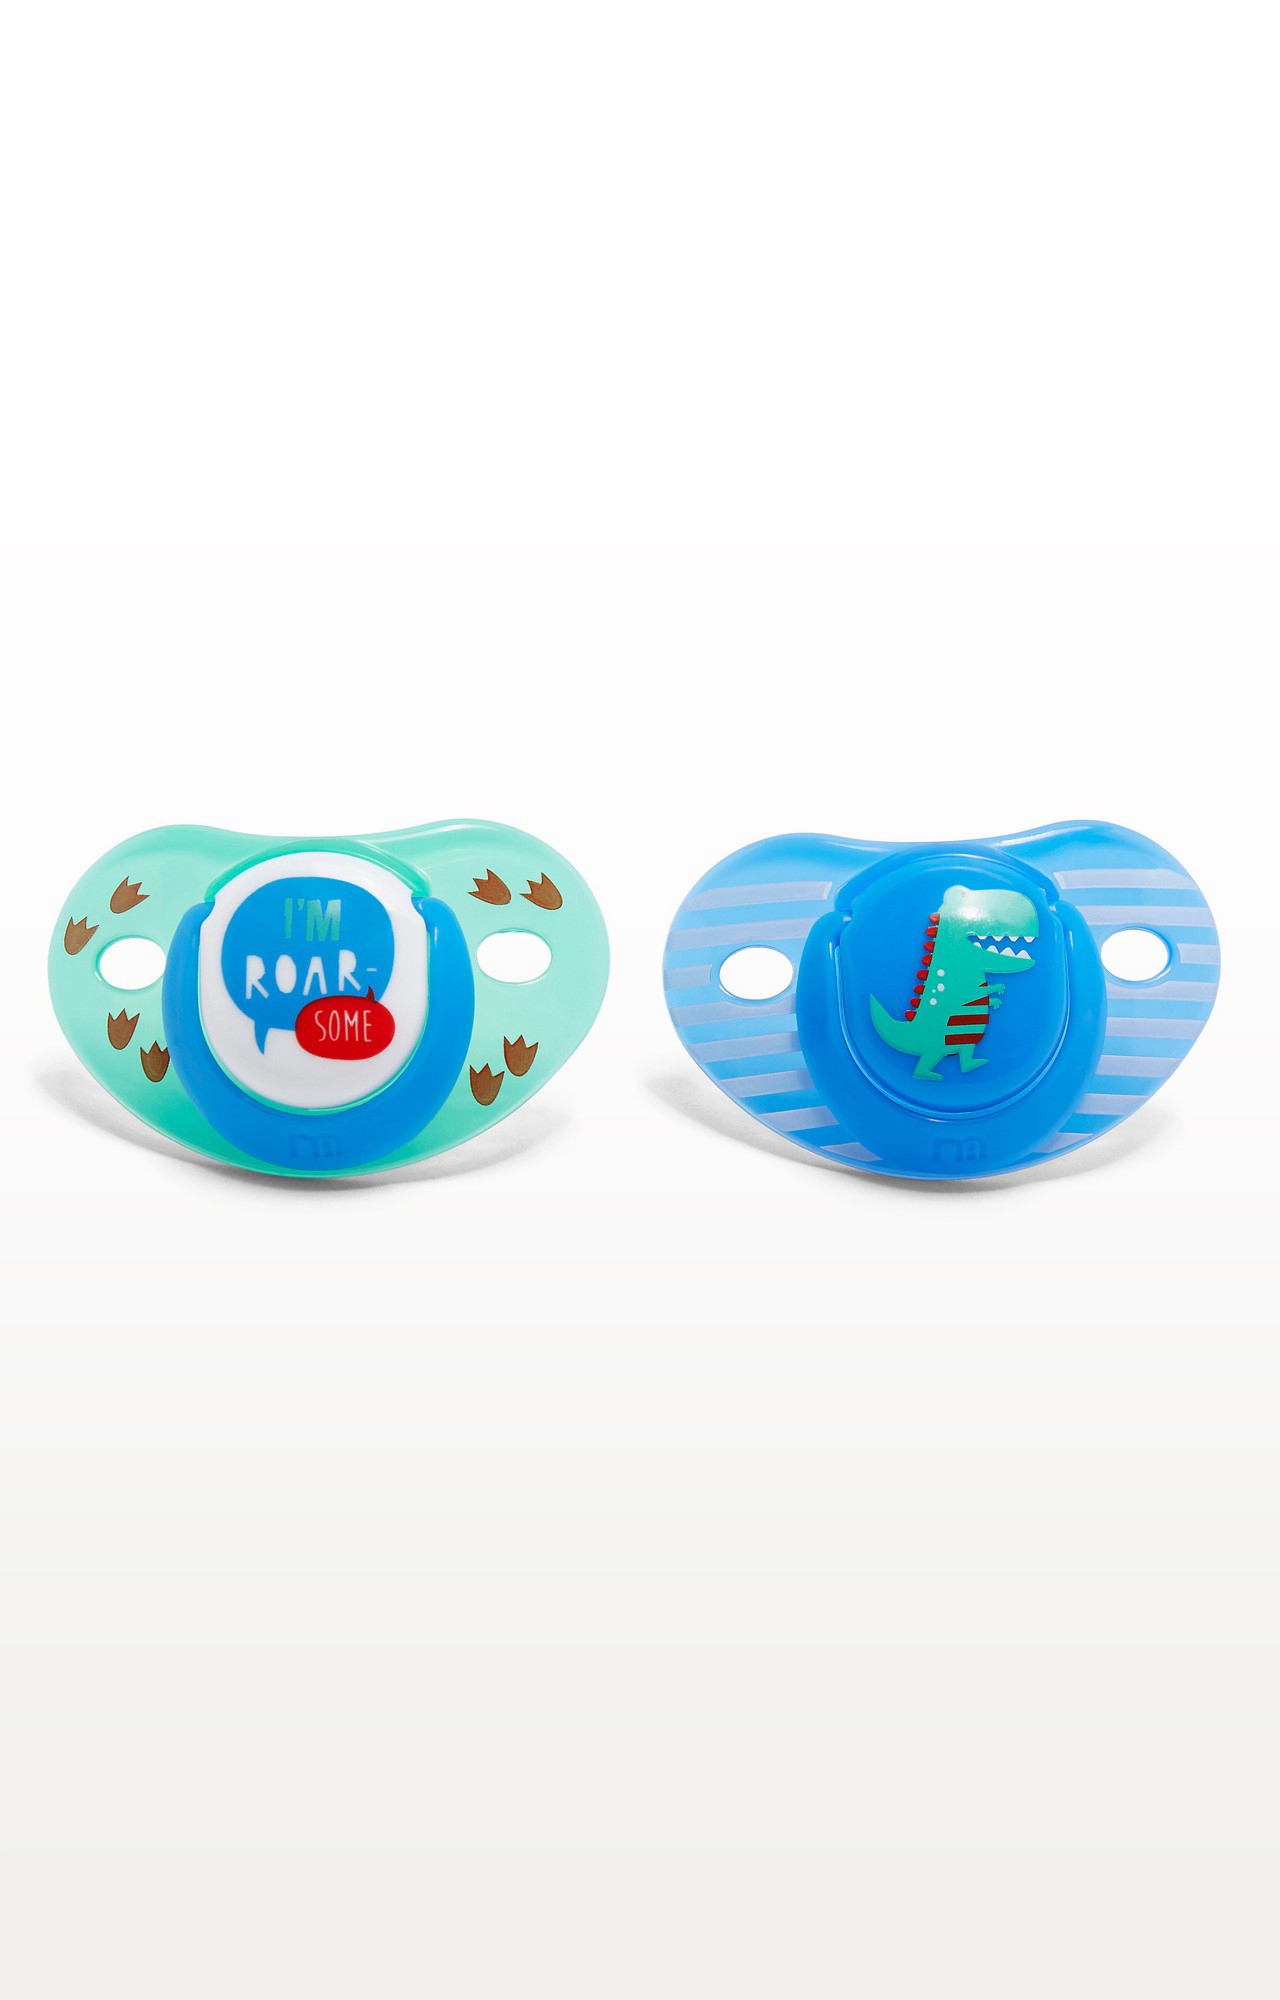 Orthodontic Soothers 6 Months - Pack of 2